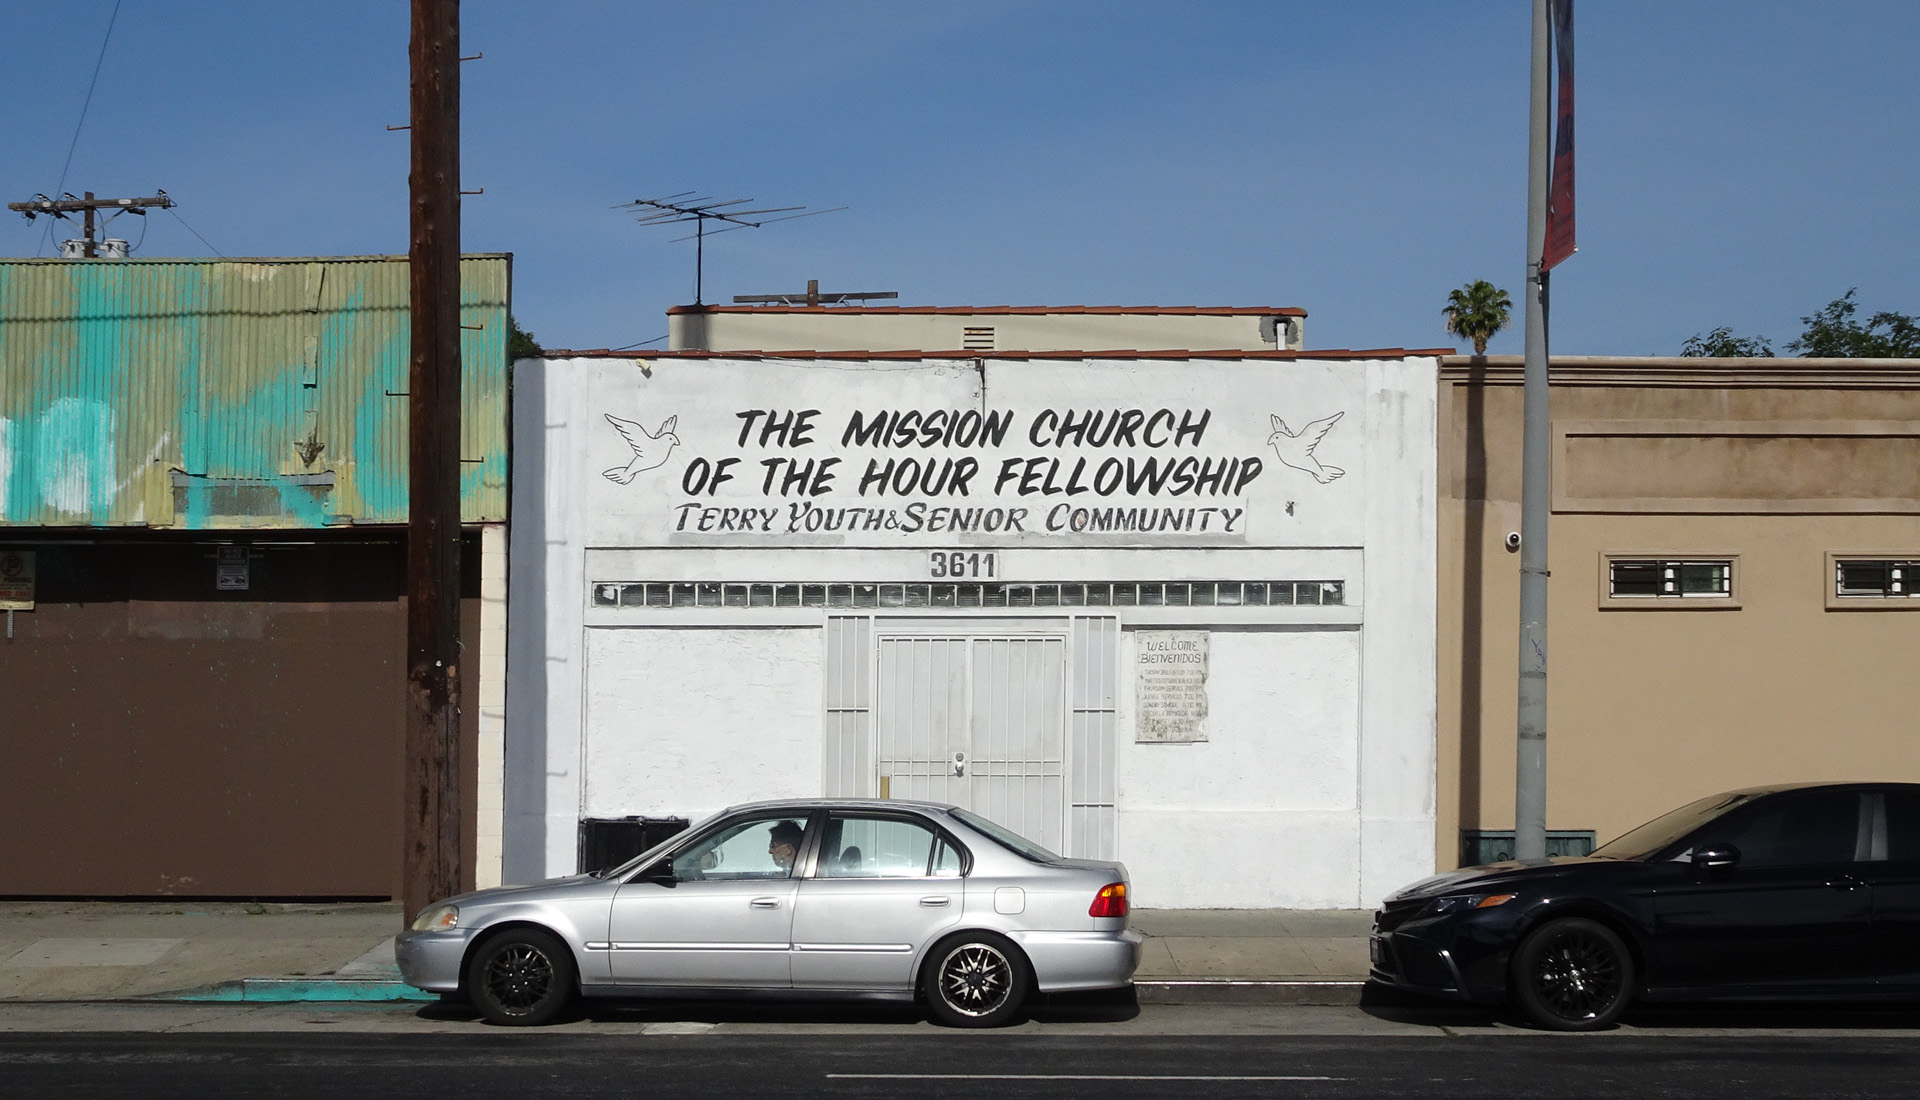 The Mission Church Of The Hour Fellow Ship